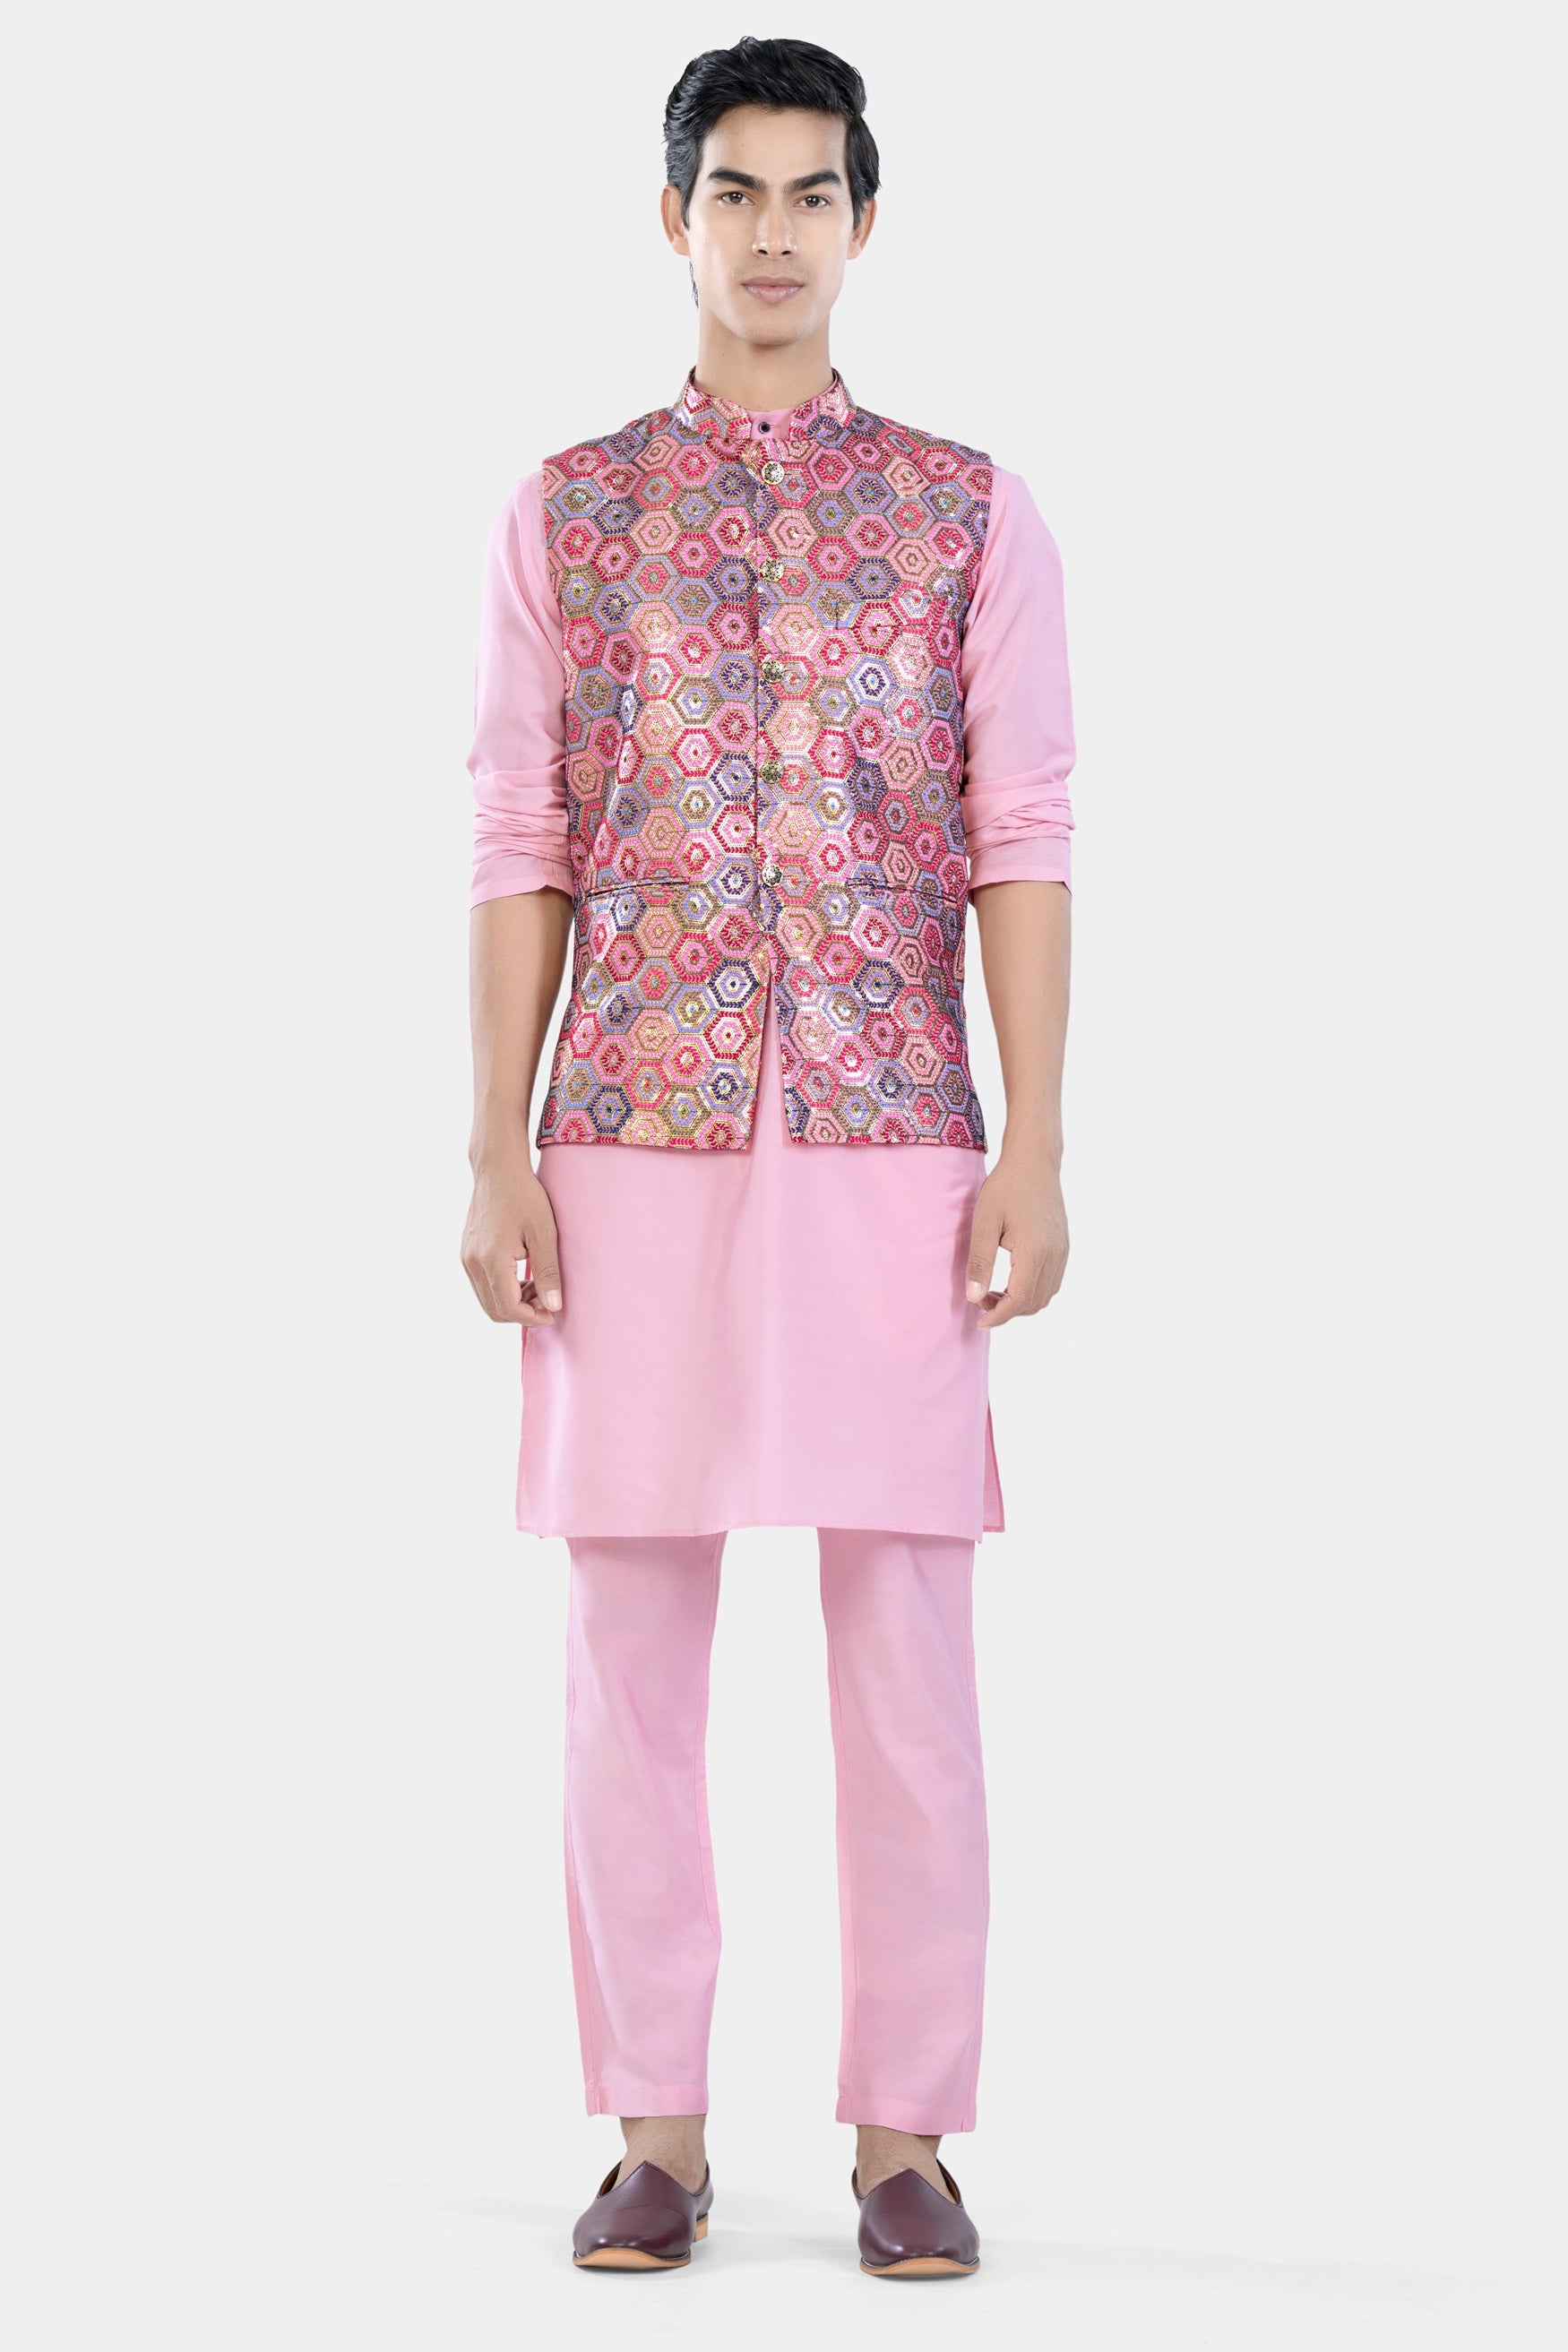 Radical Pink and Rhino Blue Multicolour Honeycomb Sequin and Thread Embroidered Designer Nehru Jacket WC3469-36,  WC3469-38,  WC3469-40,  WC3469-42,  WC3469-44,  WC3469-46,  WC3469-48,  WC3469-50,  WC3469-52,  WC3469-54,  WC3469-56,  WC3469-58,  WC3469-60